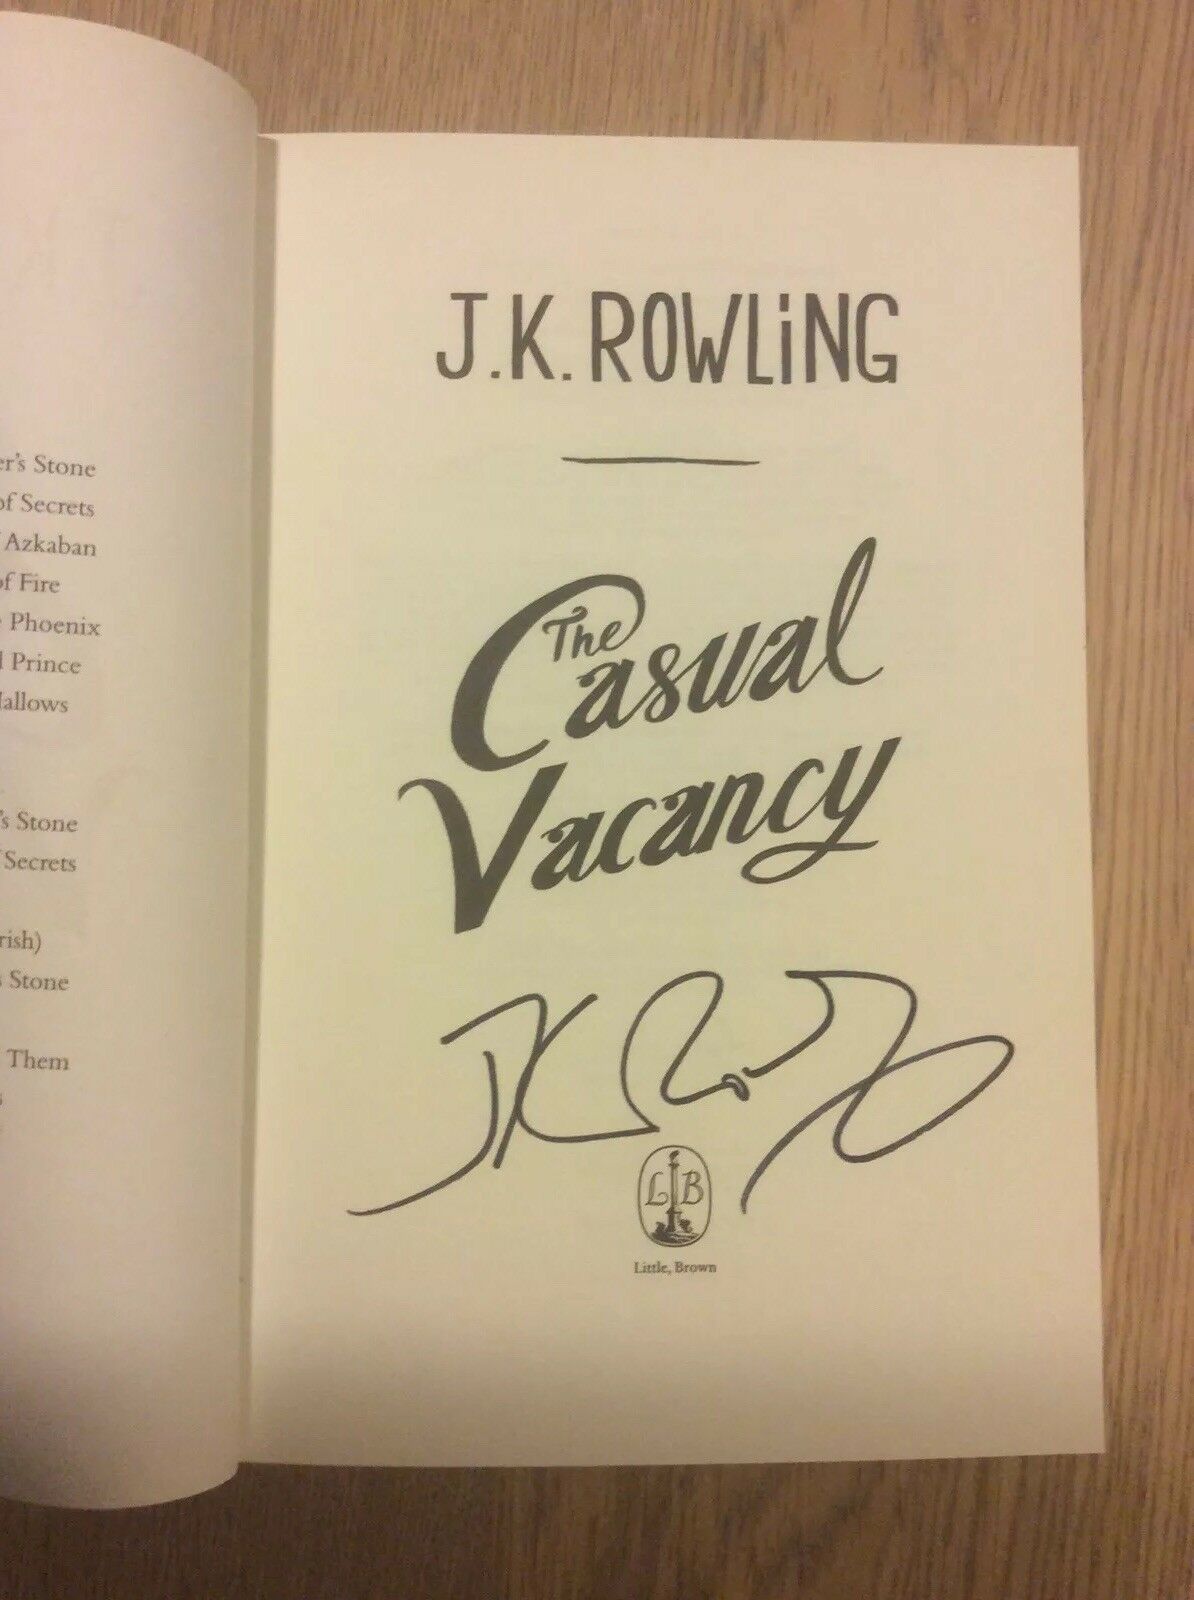 JK Rowling Forgery inside of a Casual Vacancy